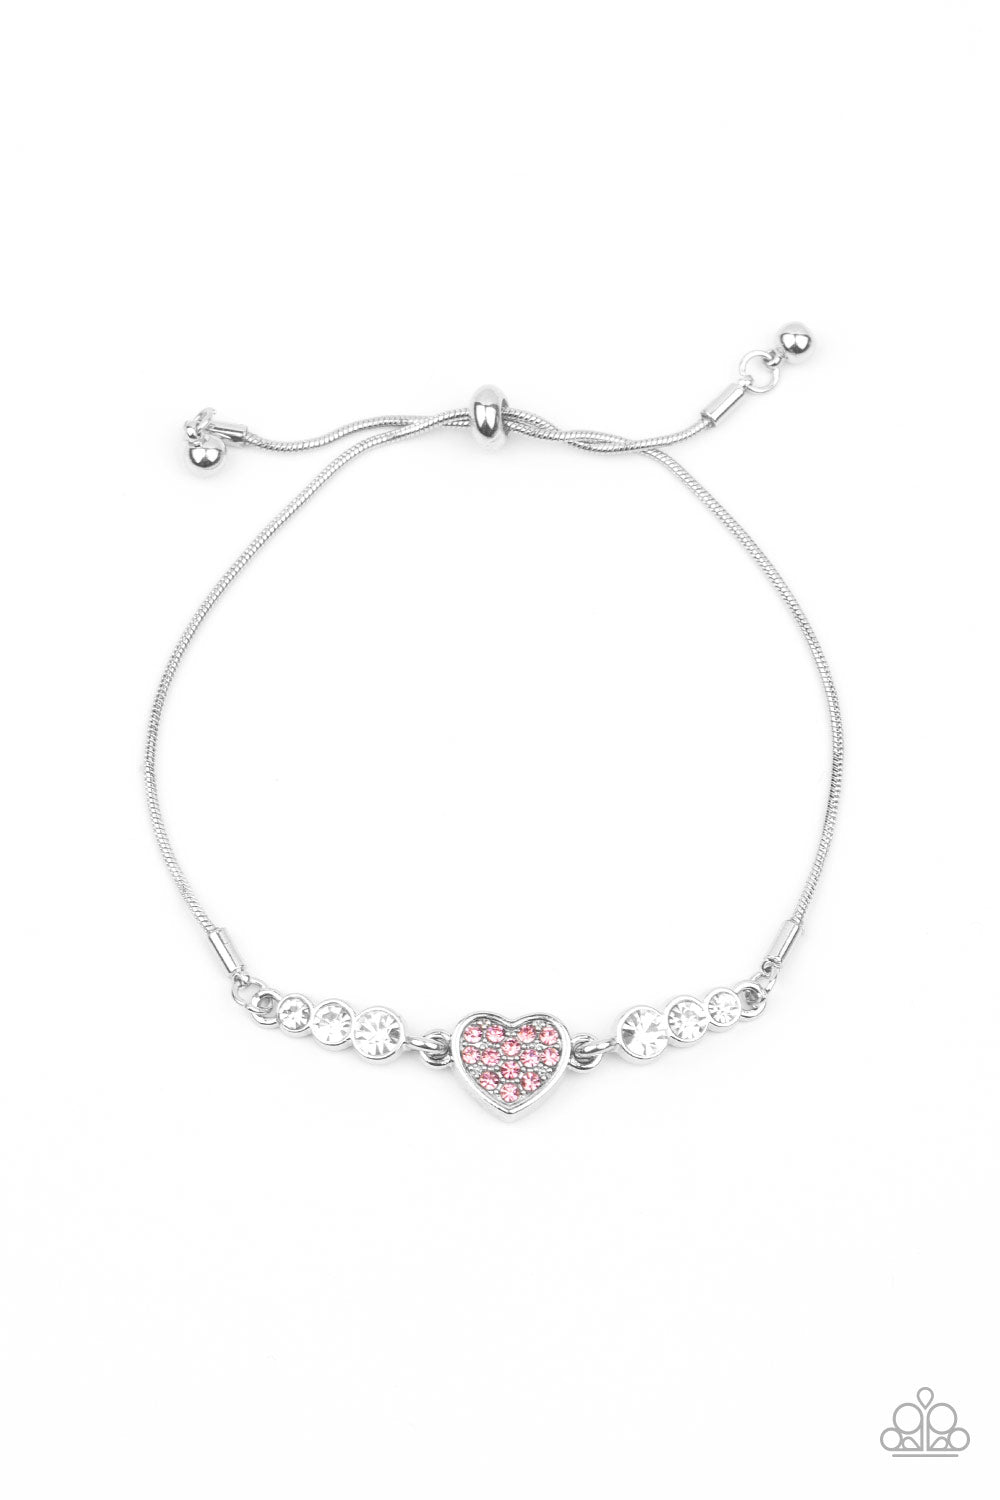 Big Hearted Beam Pink Bracelet Life of the Party Exclusive - Princess Glam Shop